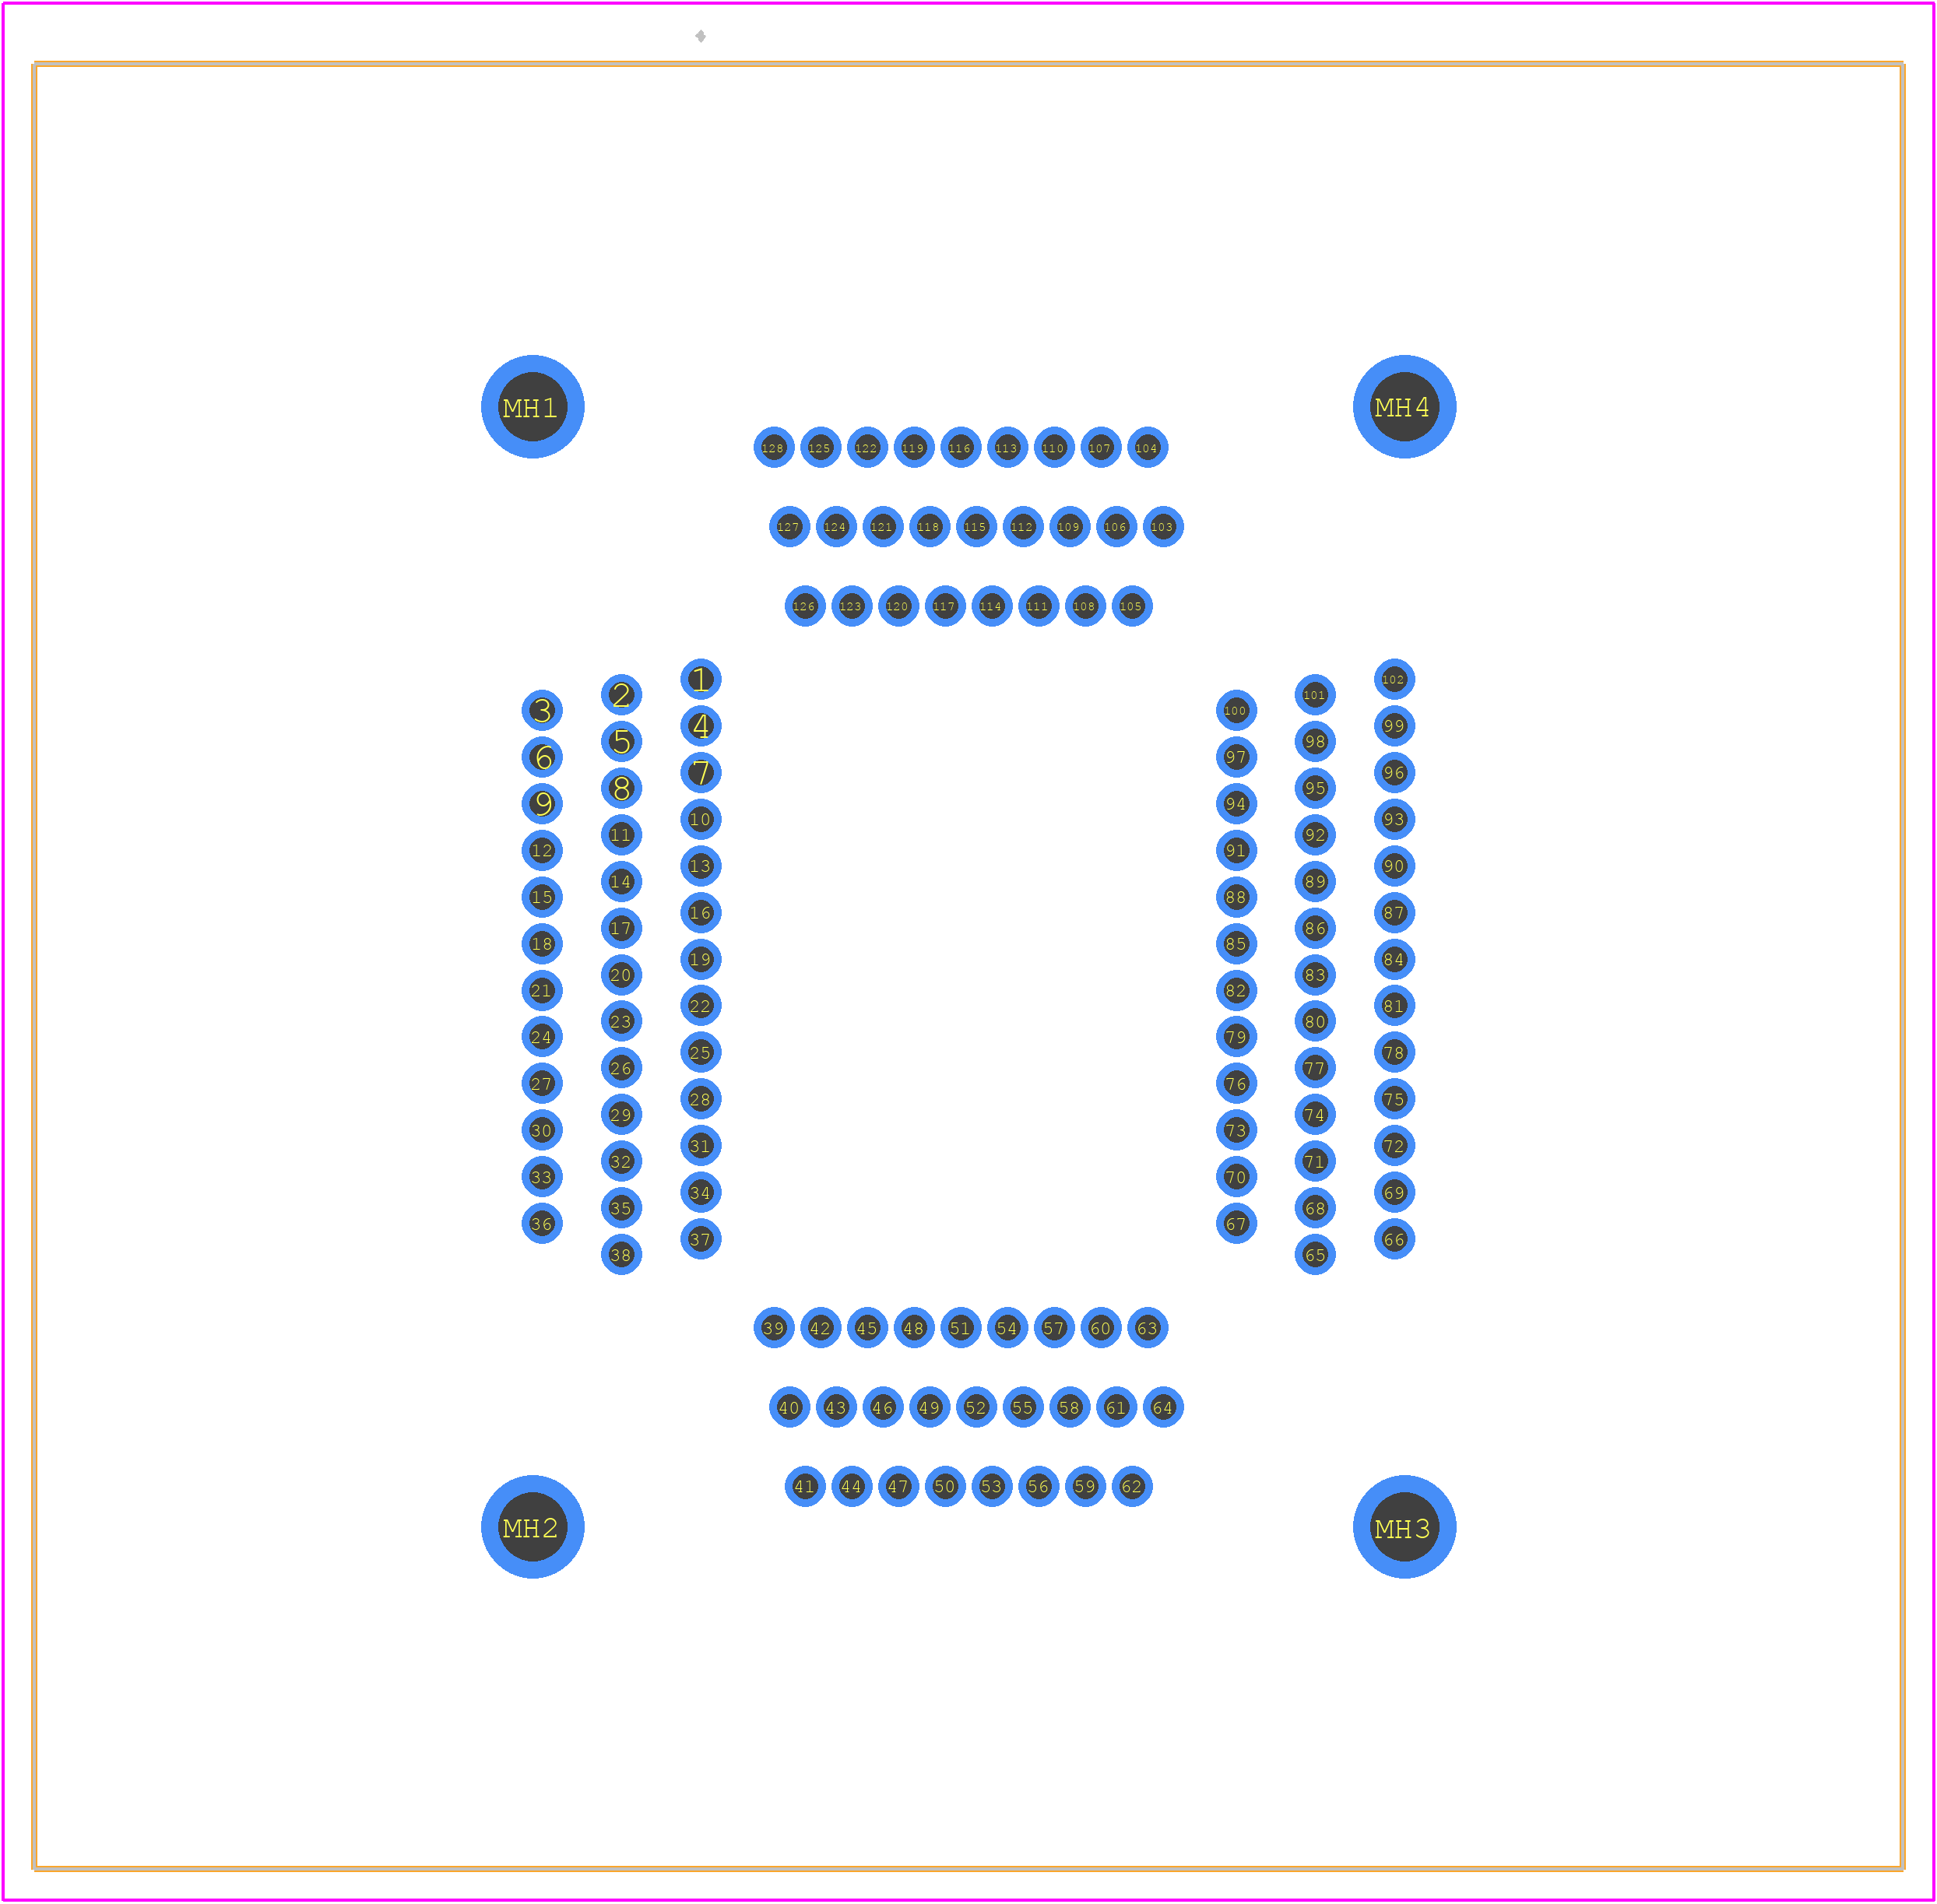 IC51-1284-1433-10 - Yamaichi PCB footprint - Other - Other - IC51-1284-1433-10-3